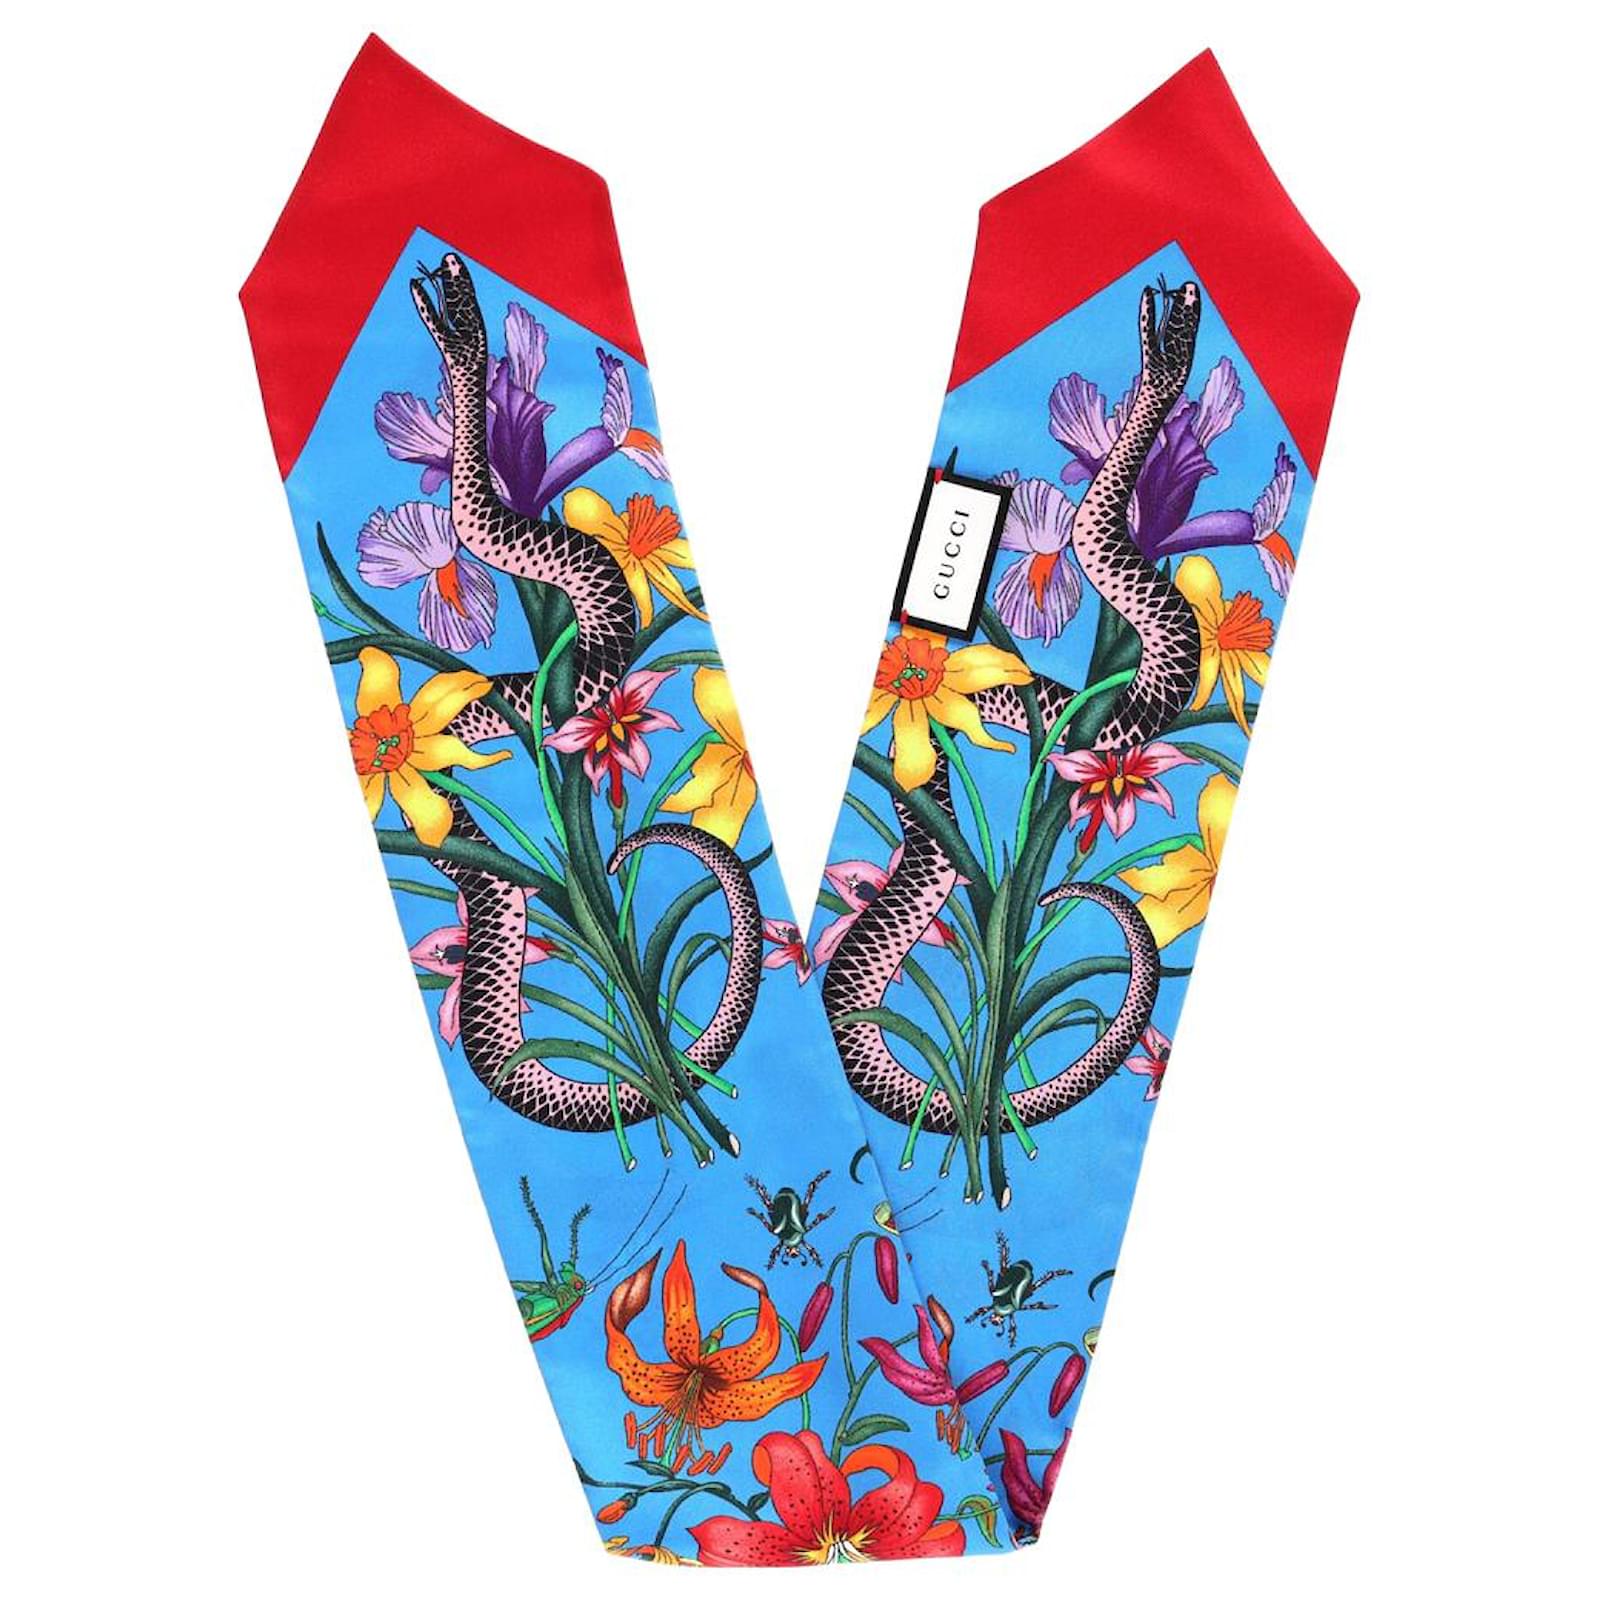 Gucci Floral Print Twilly Scarf in Multicolor Silk Multiple colors